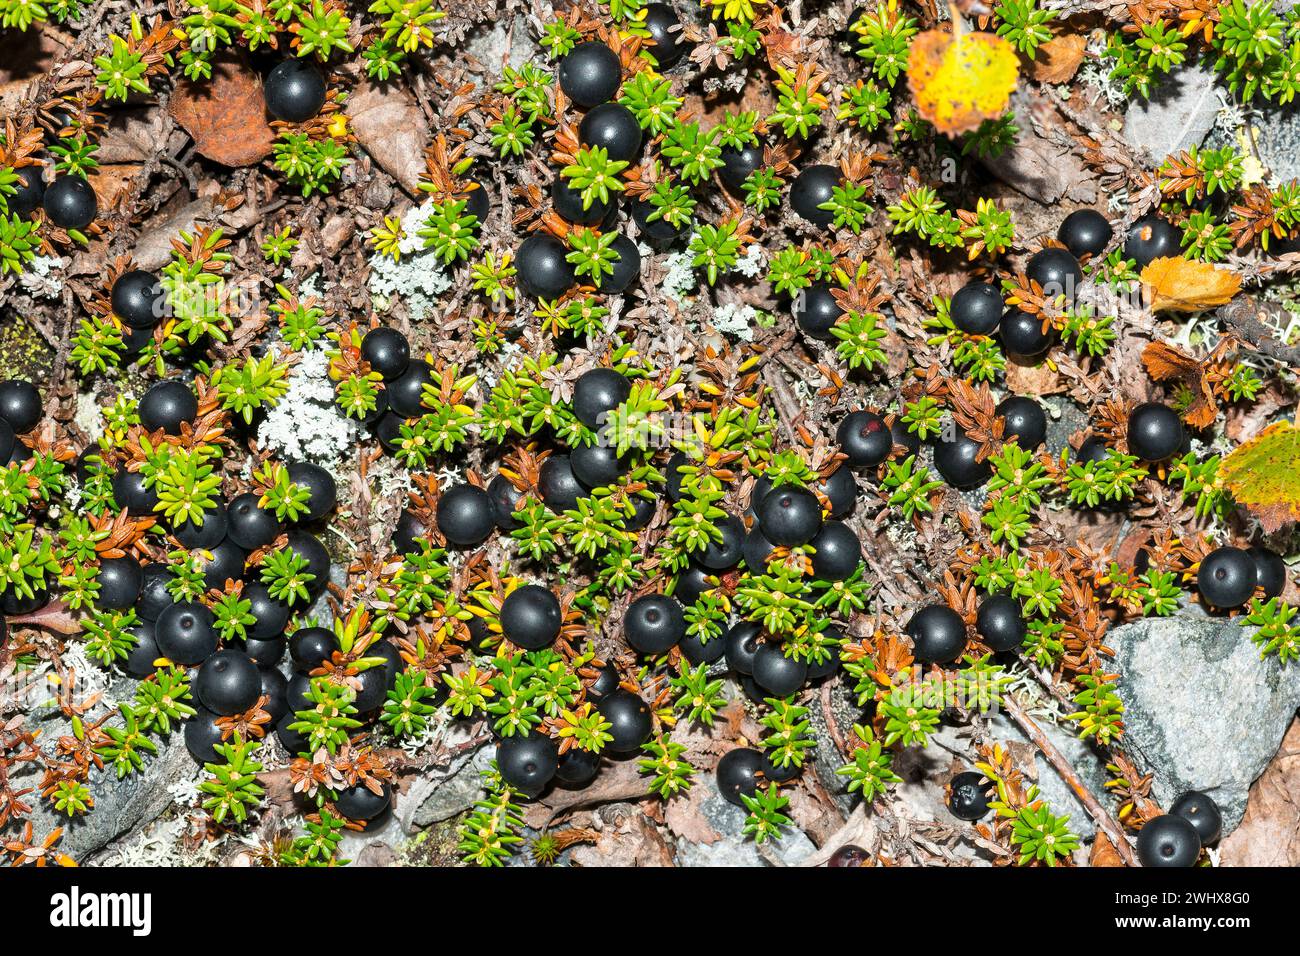 Black crowberry in sweden Stock Photo